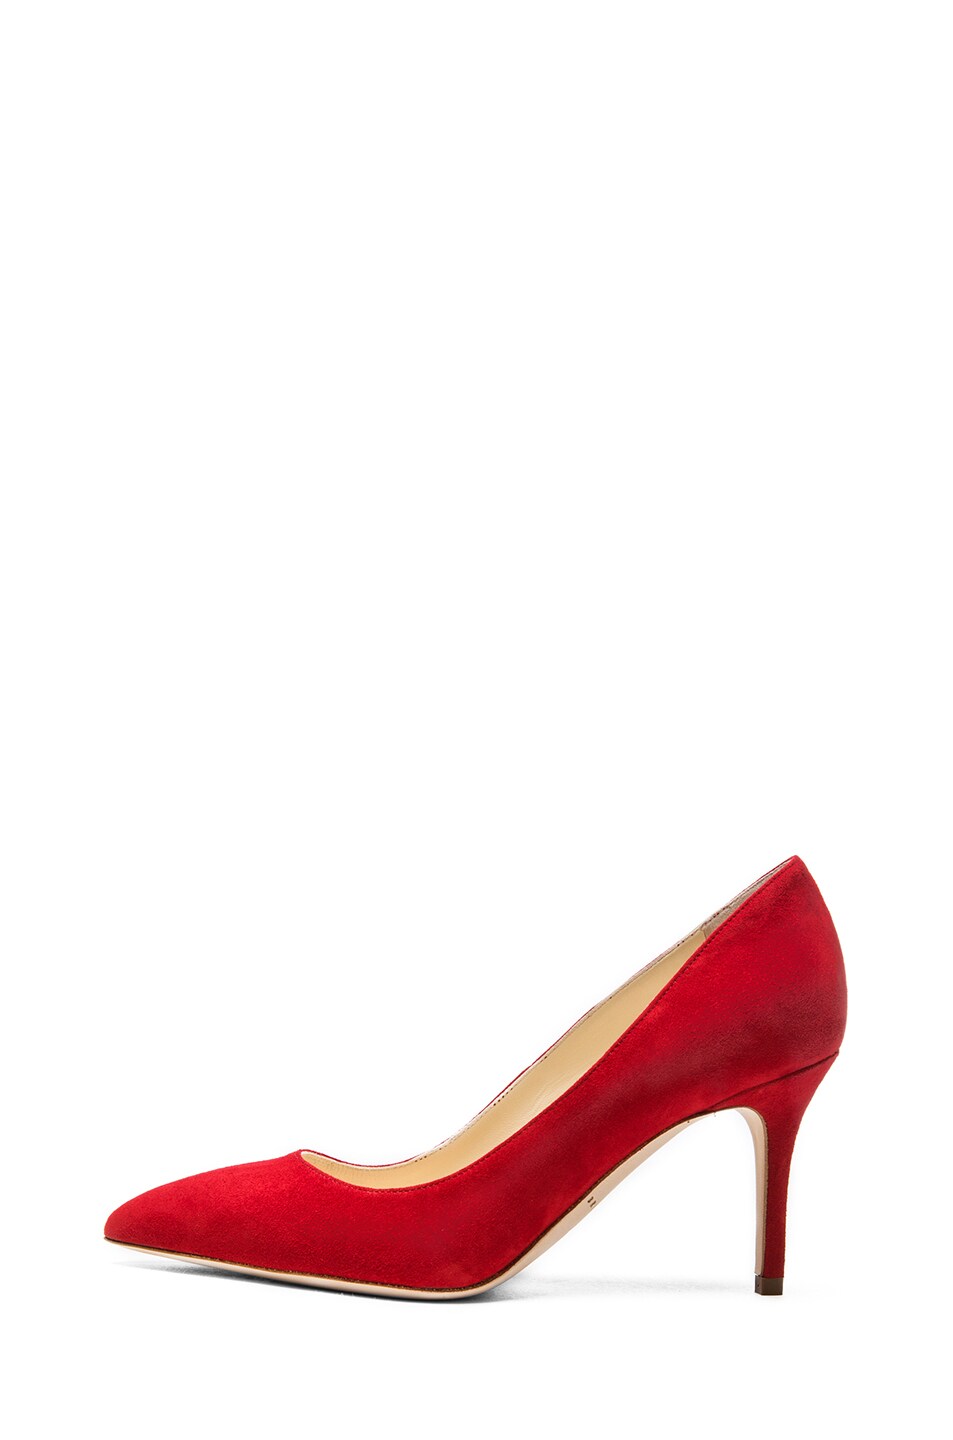 Image 1 of Brian Atwood Cassandra Suede Pumps in Red Suede